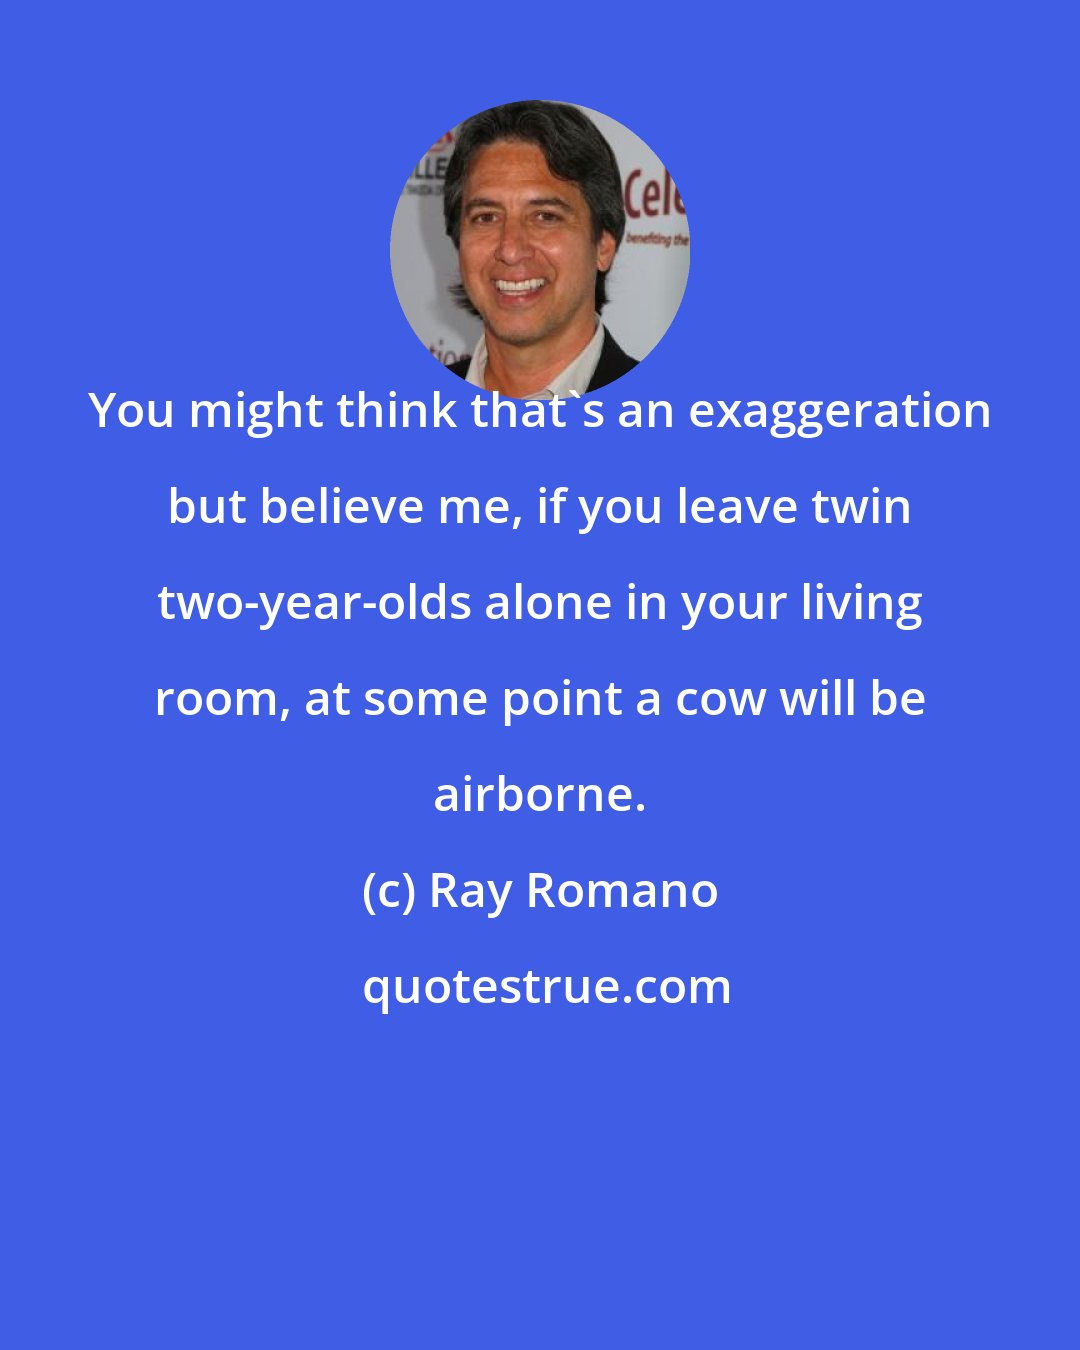 Ray Romano: You might think that's an exaggeration but believe me, if you leave twin two-year-olds alone in your living room, at some point a cow will be airborne.